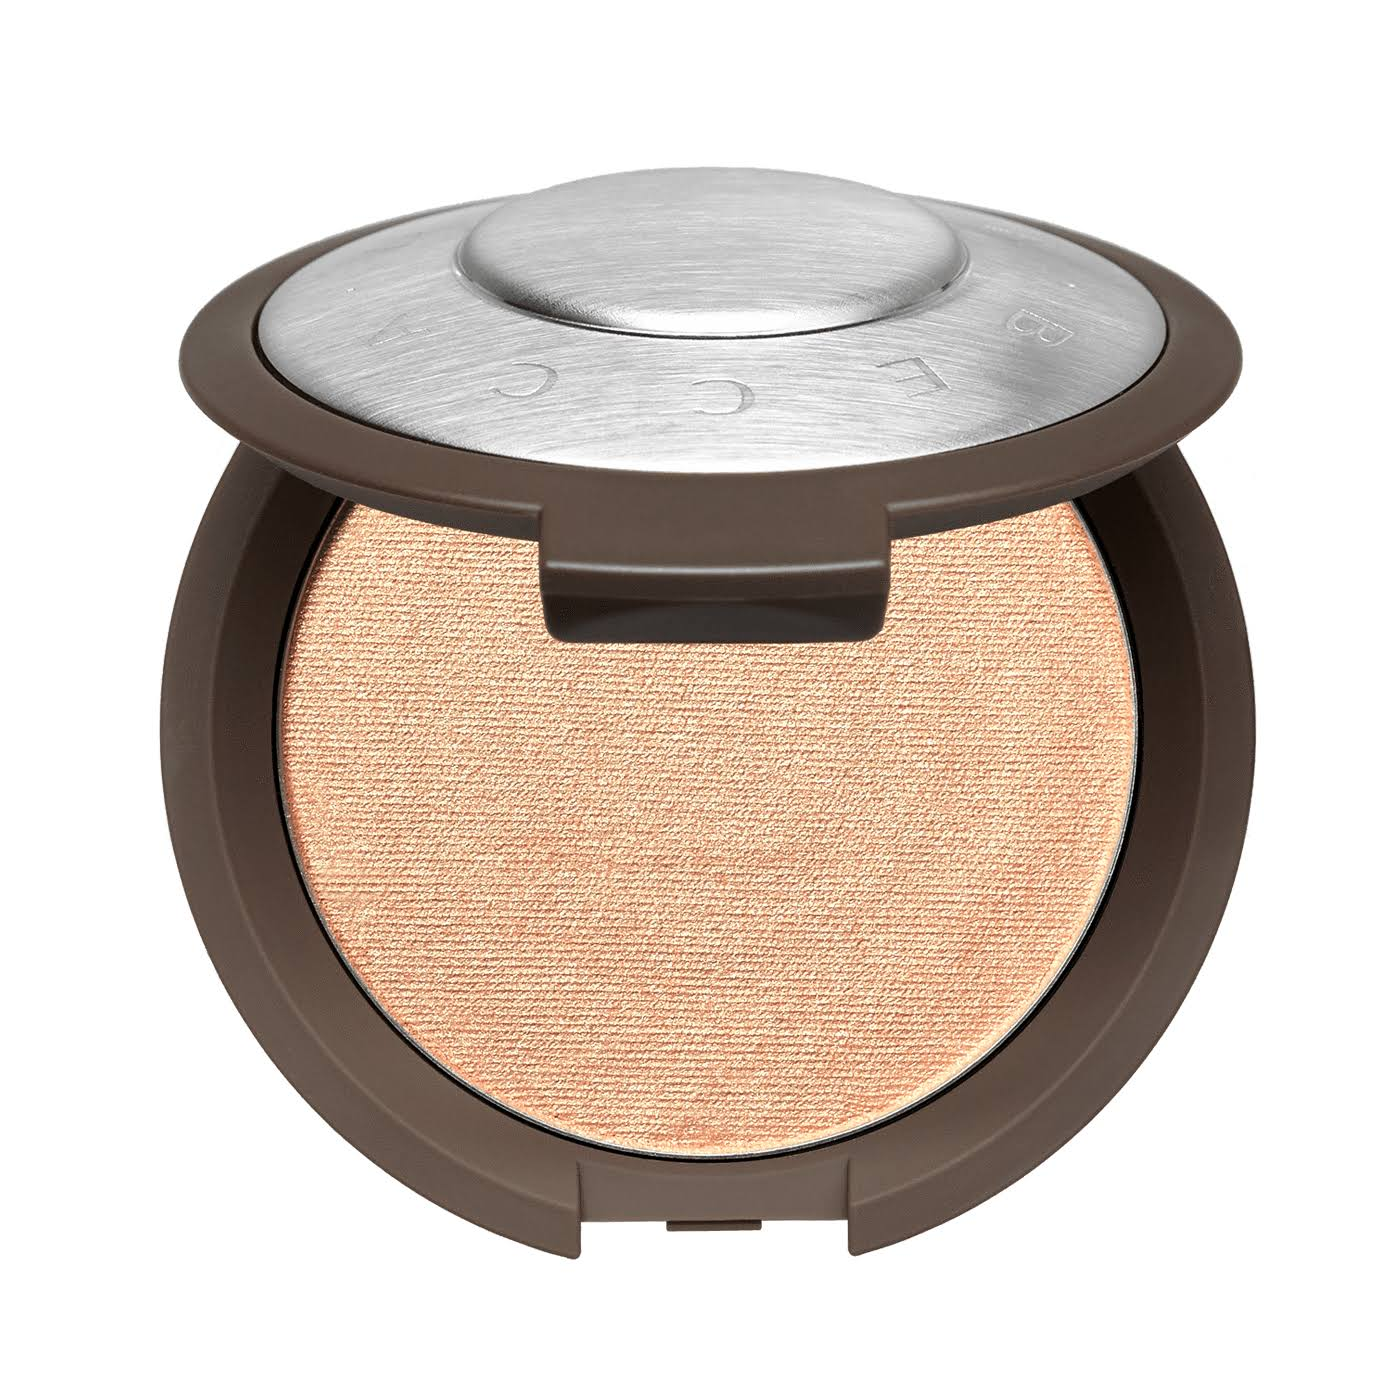 Becca Shimmering Skin Perfector Pressed Highlighter - Feel Gorgeous